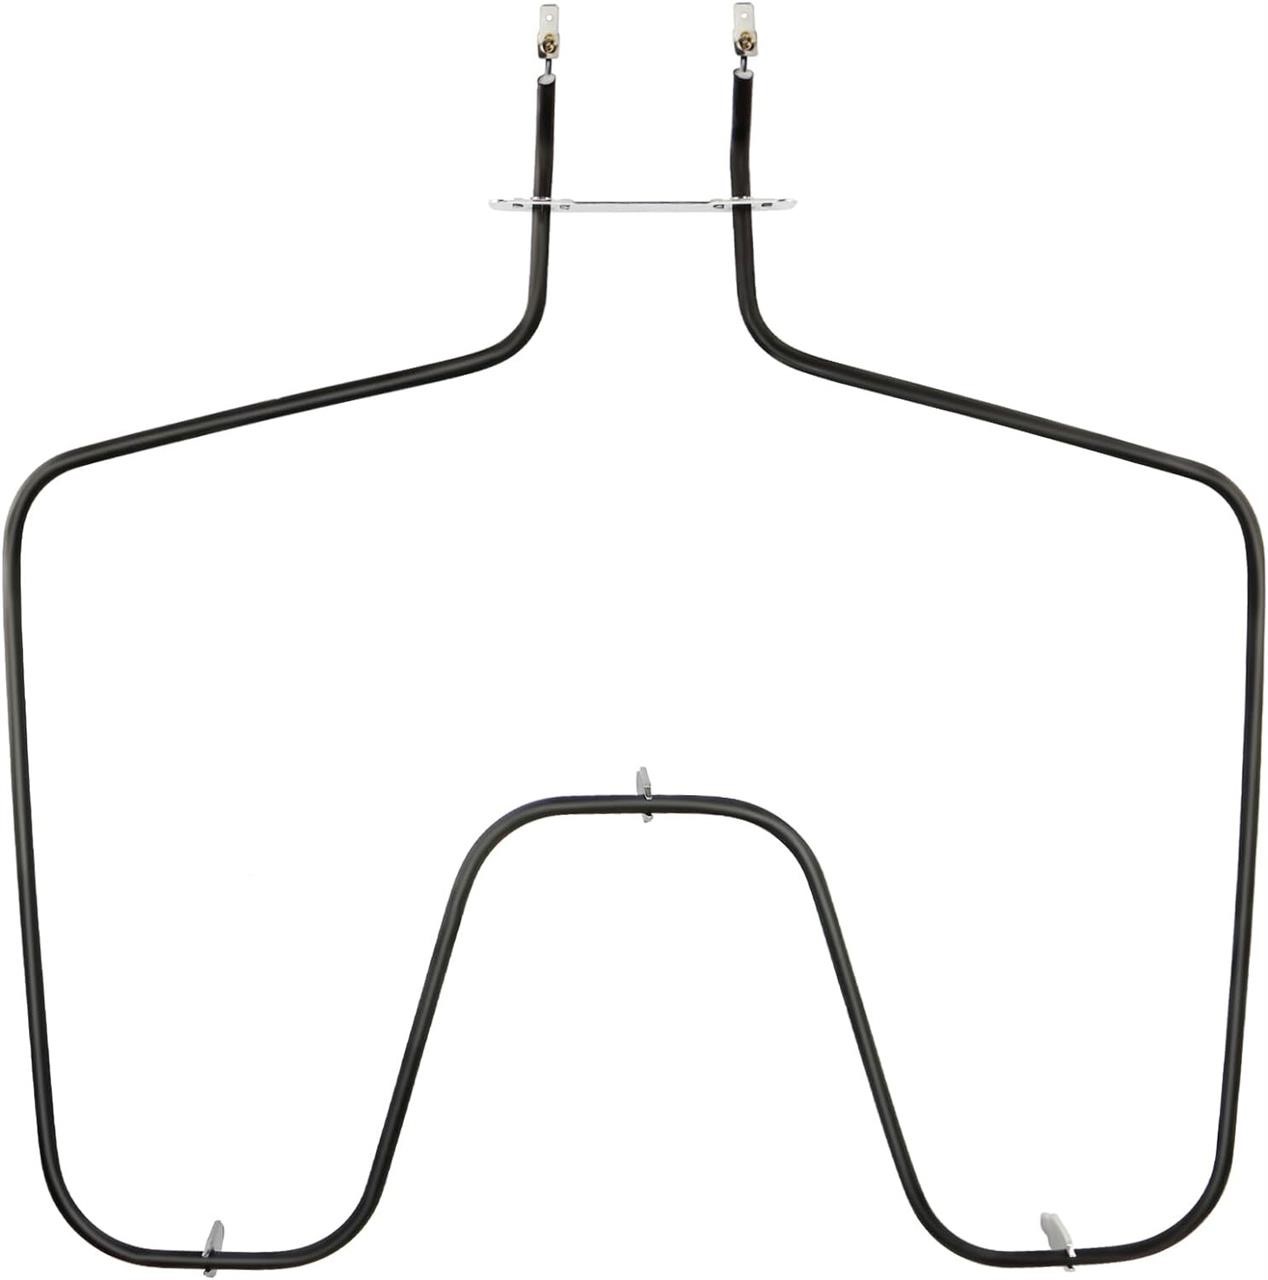 WB44K10005 Oven Bake Element - GE  Hotpoint